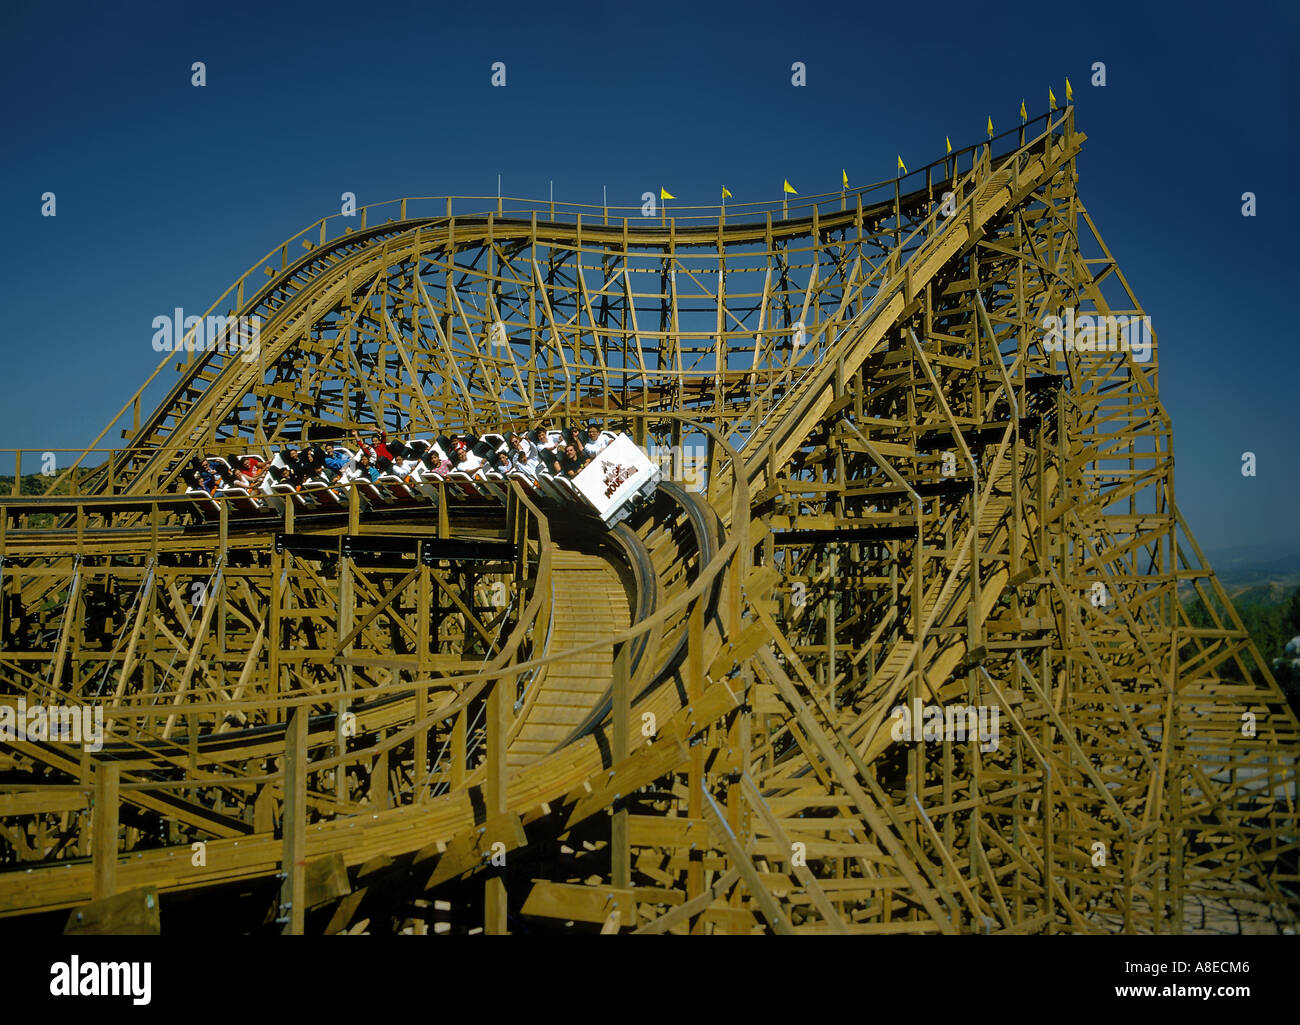 Psyclone at Six Flags Magic Mountain in Valencia, California, an old ...